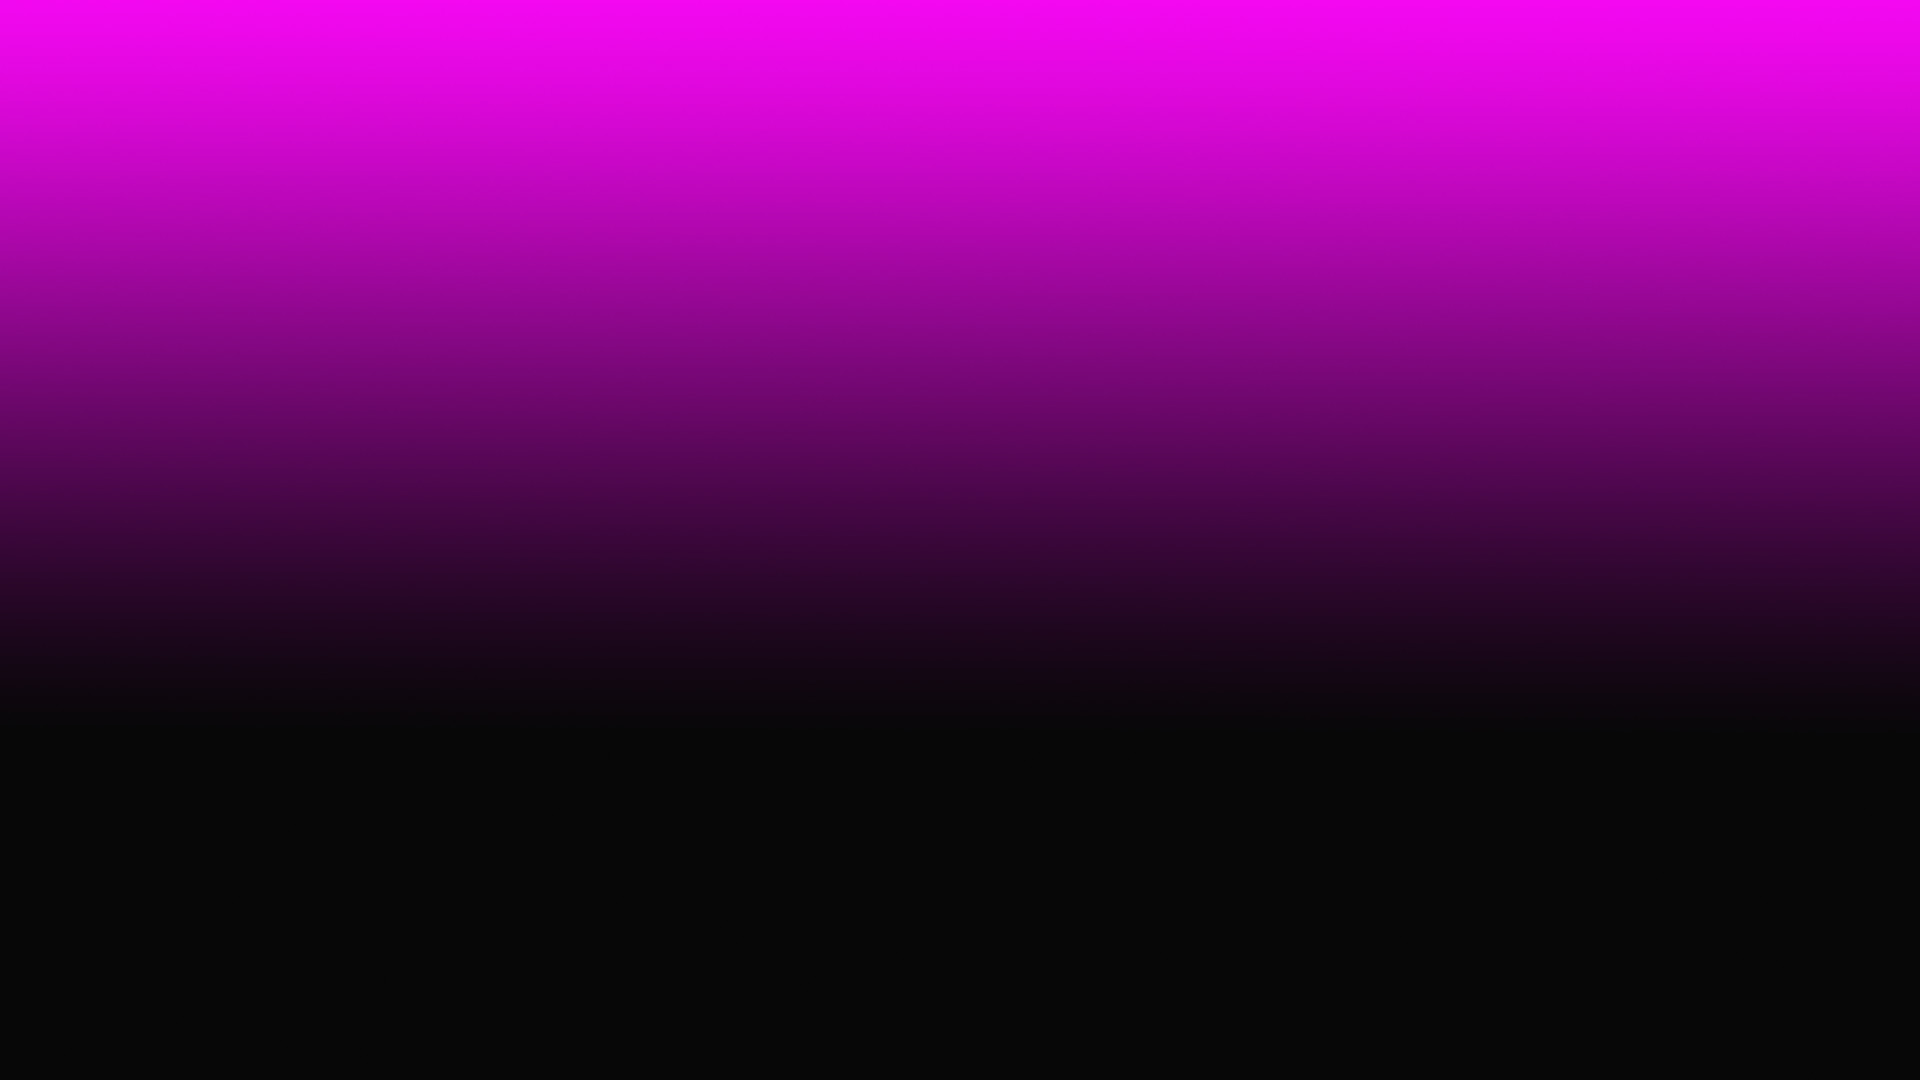 Pink And Purple Ombre Wallpaper 63 Images